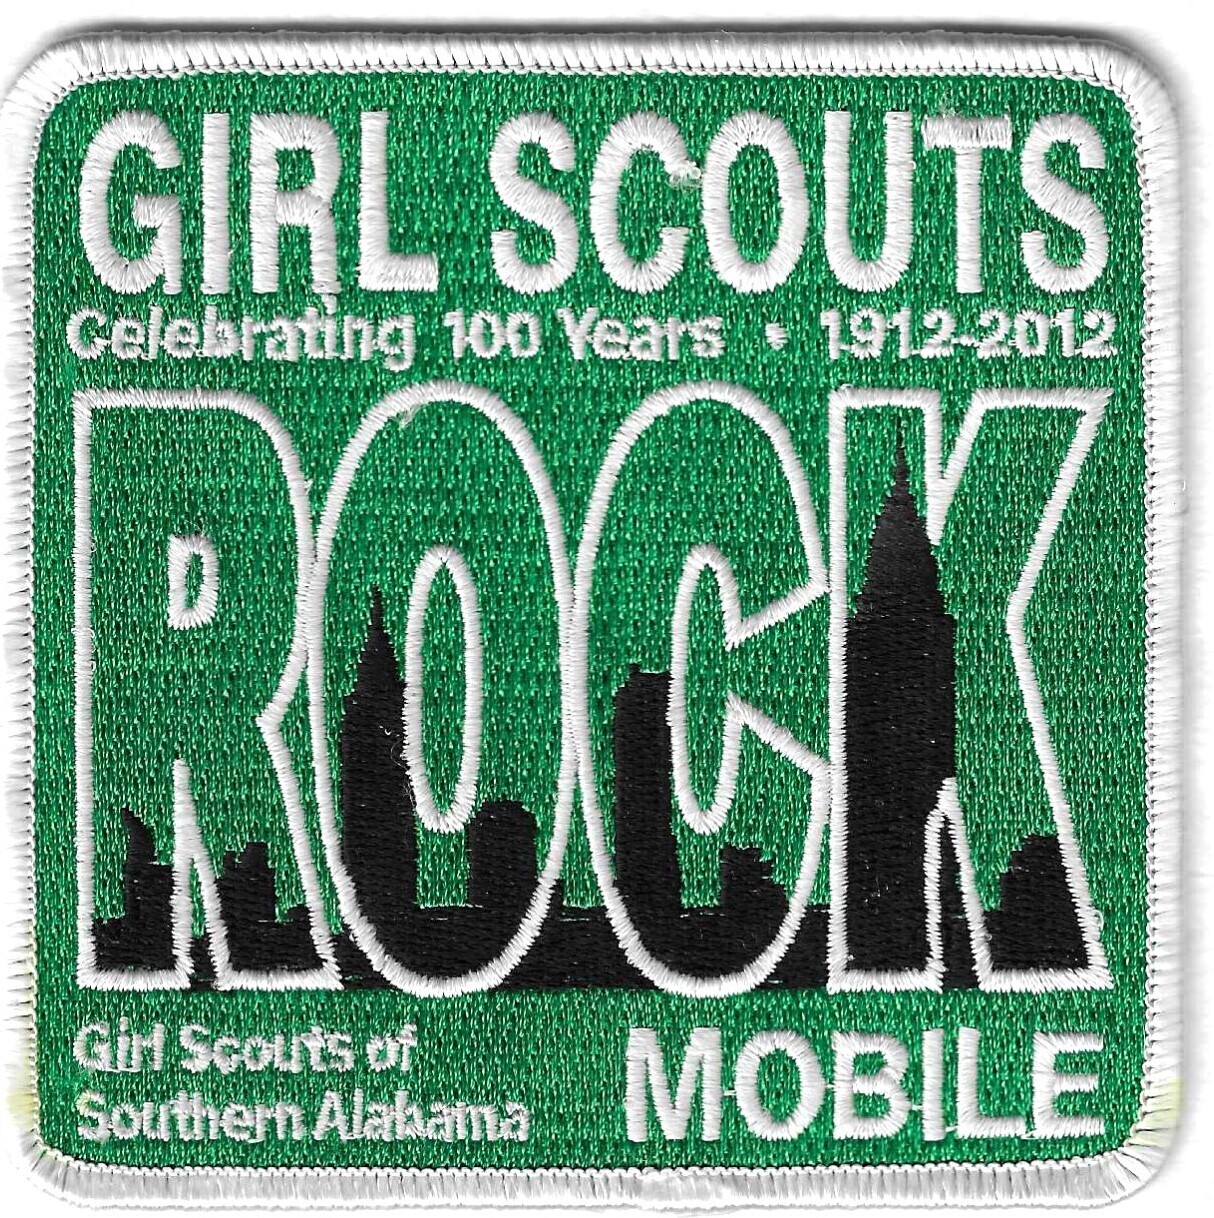 100th Anniversary Patch GS Rock Mobile GSSA (large patch)